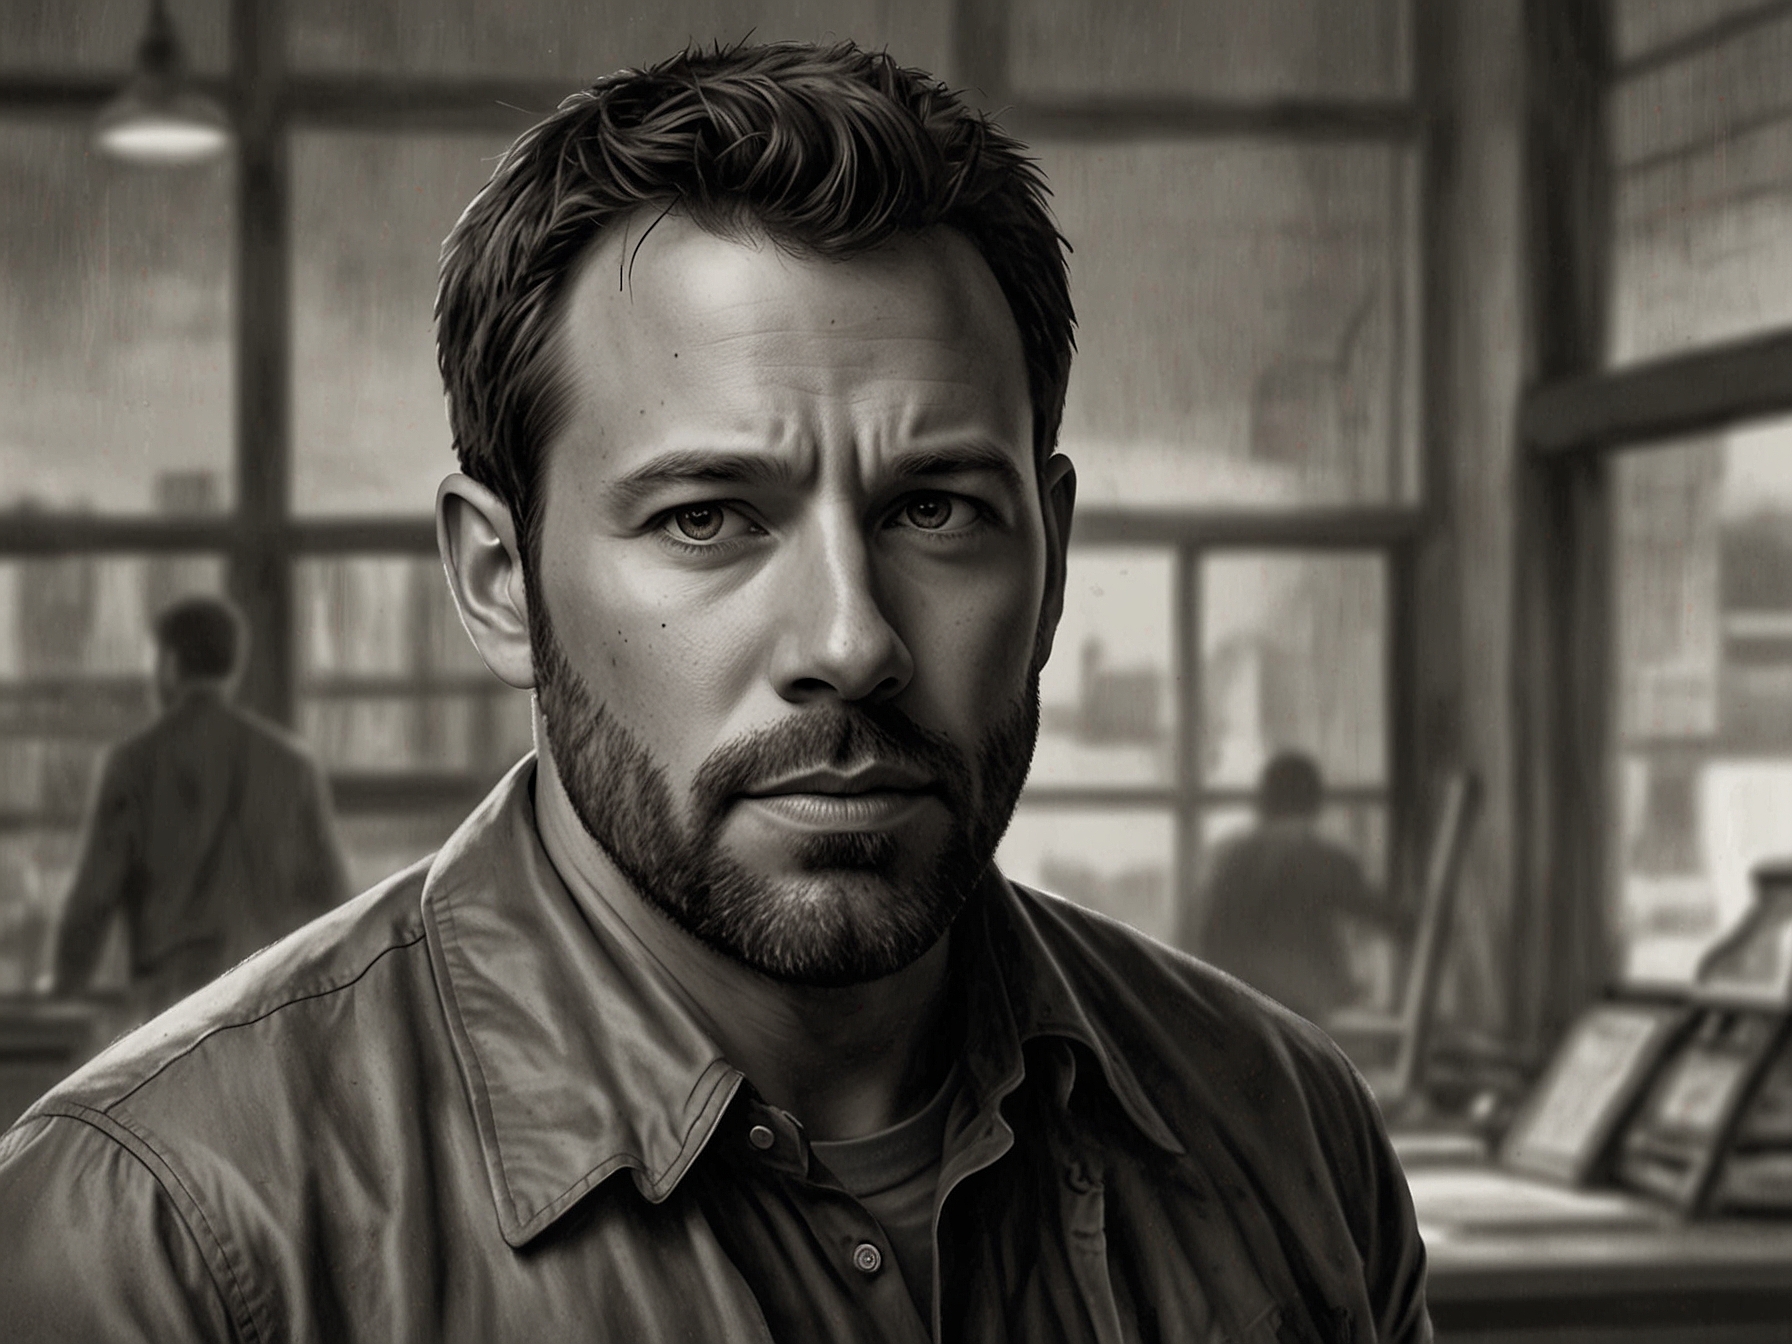 Ben Affleck on a film set, engrossed in his role as an actor and director, managing his professional commitments while balancing personal life.